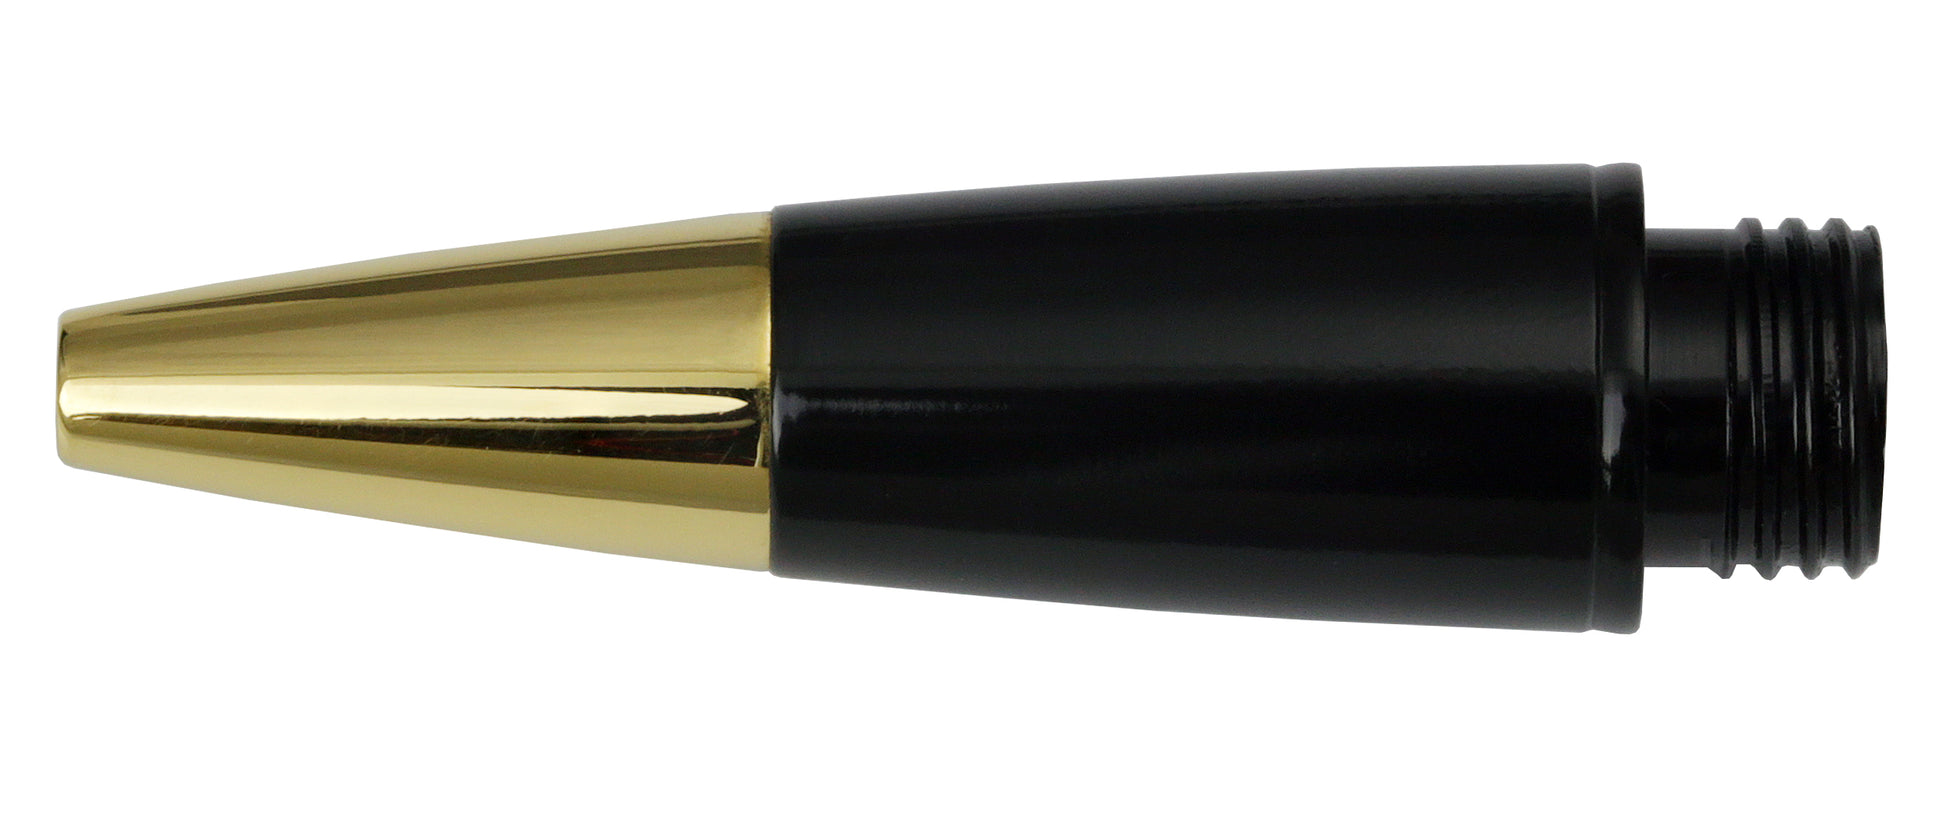 Xezo - Side view of a Gold-Plated Rollerball Tip with black Grip Section - Compatible with Phantom, Freelancer, Incognito, Incognito LeGrand, and Tribune rollerball pens